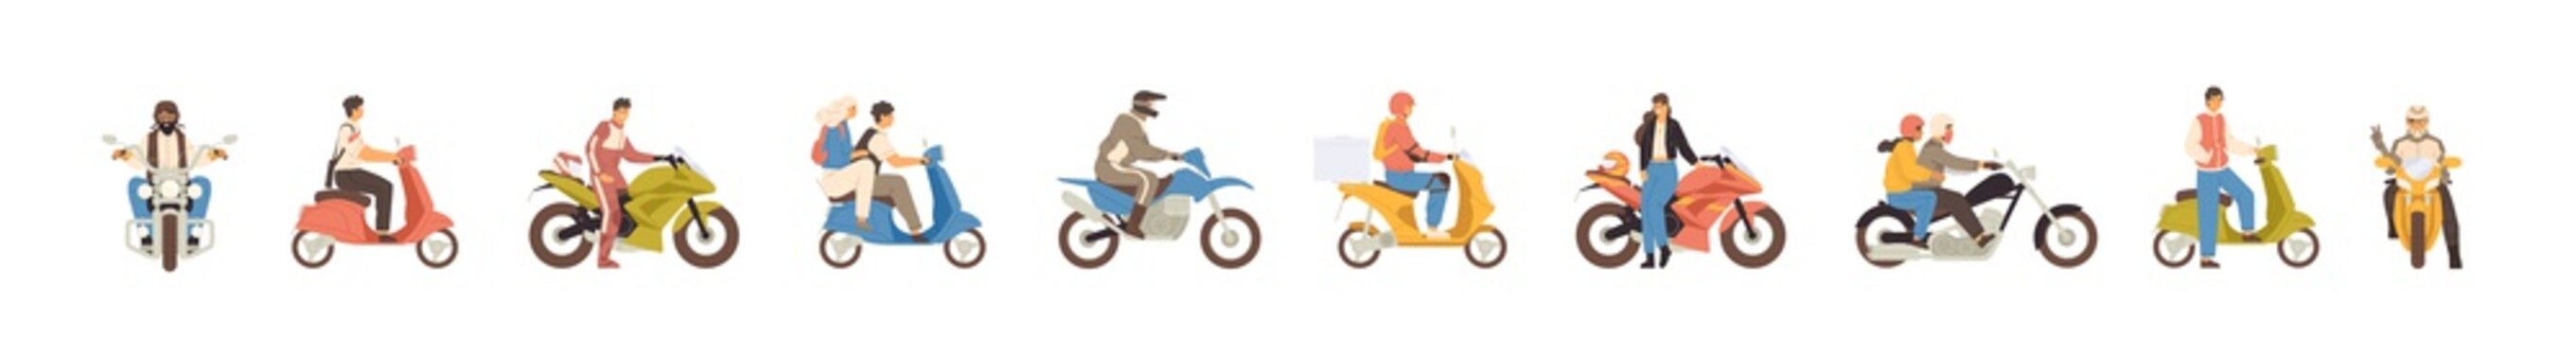 Set of different motorcycle and scooter riders vector flat illustration. Collection of various man, woman and couple drivers in helmets isolated on white background. People on motor transportation